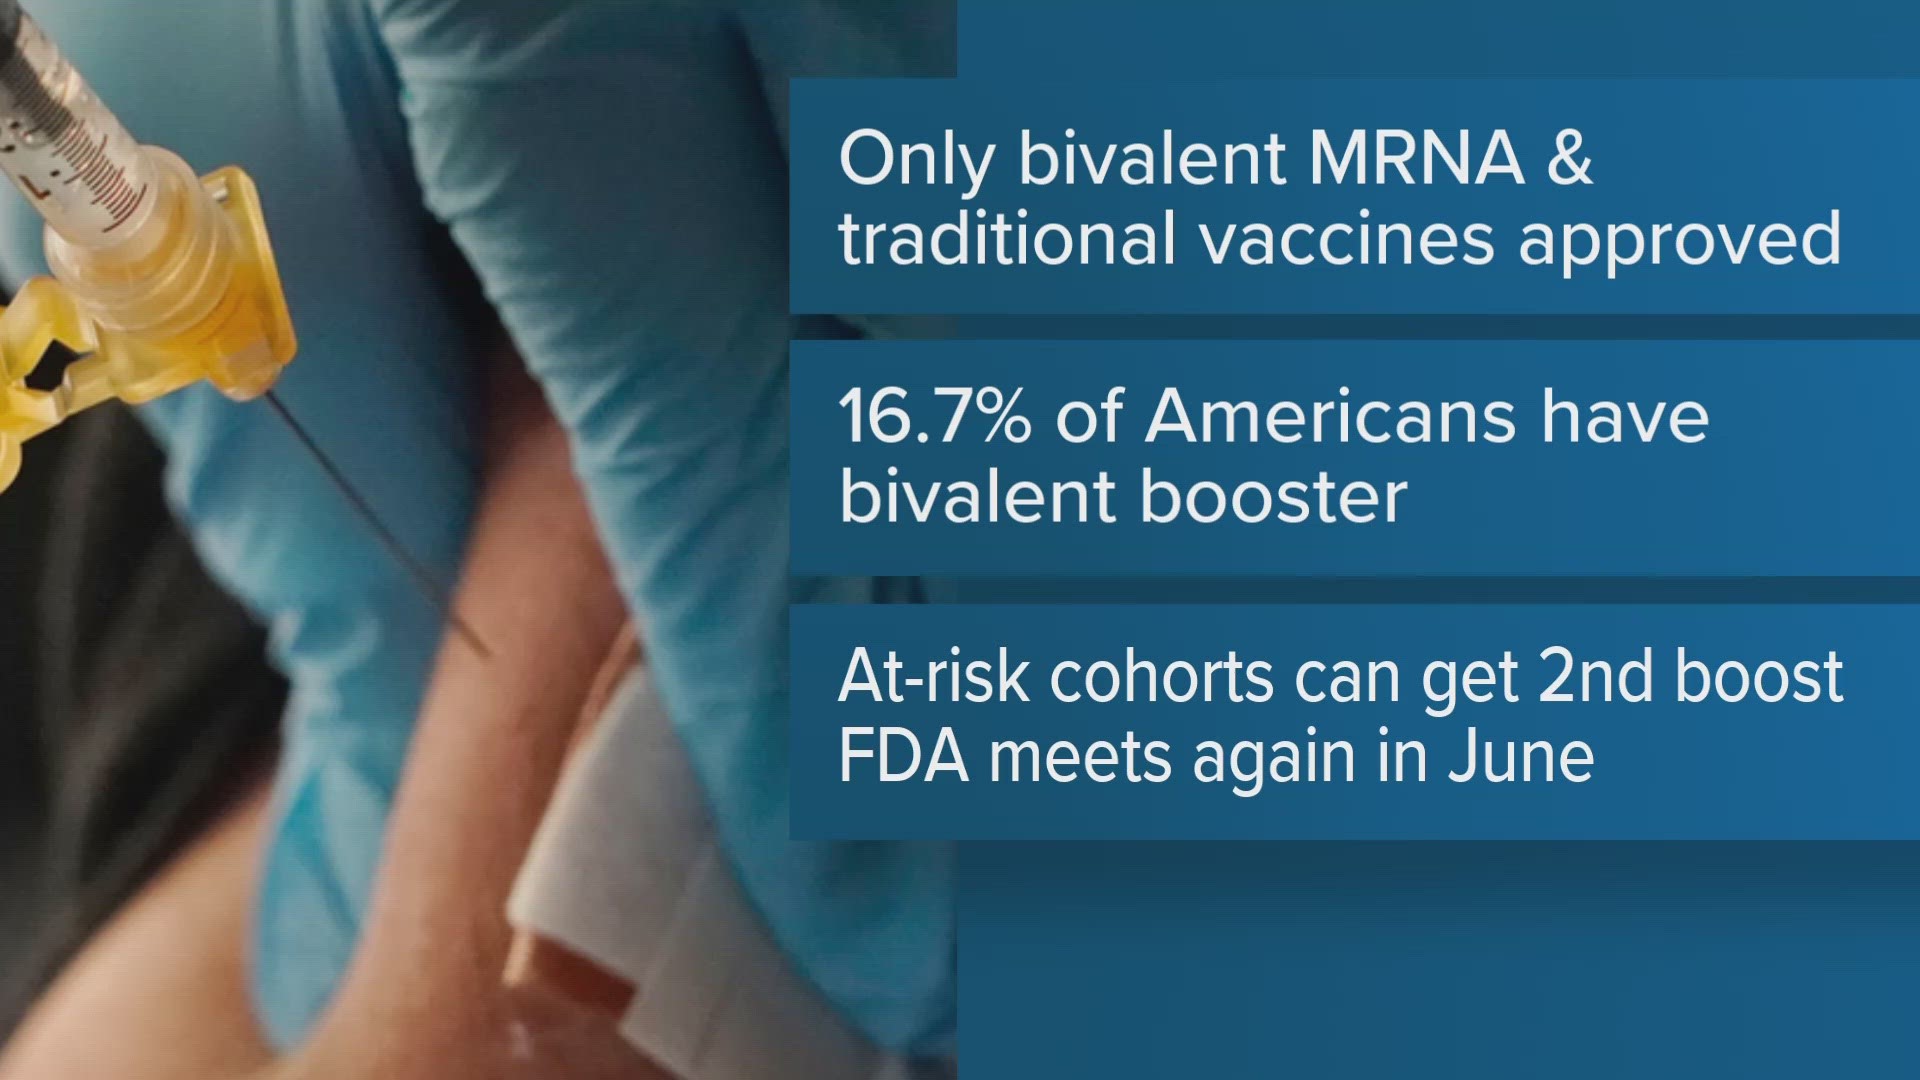 The big news is that bivalent vaccines, which came out in the fall, will be used going forward. It's an MRNA vaccine plus the Novavax vaccine.